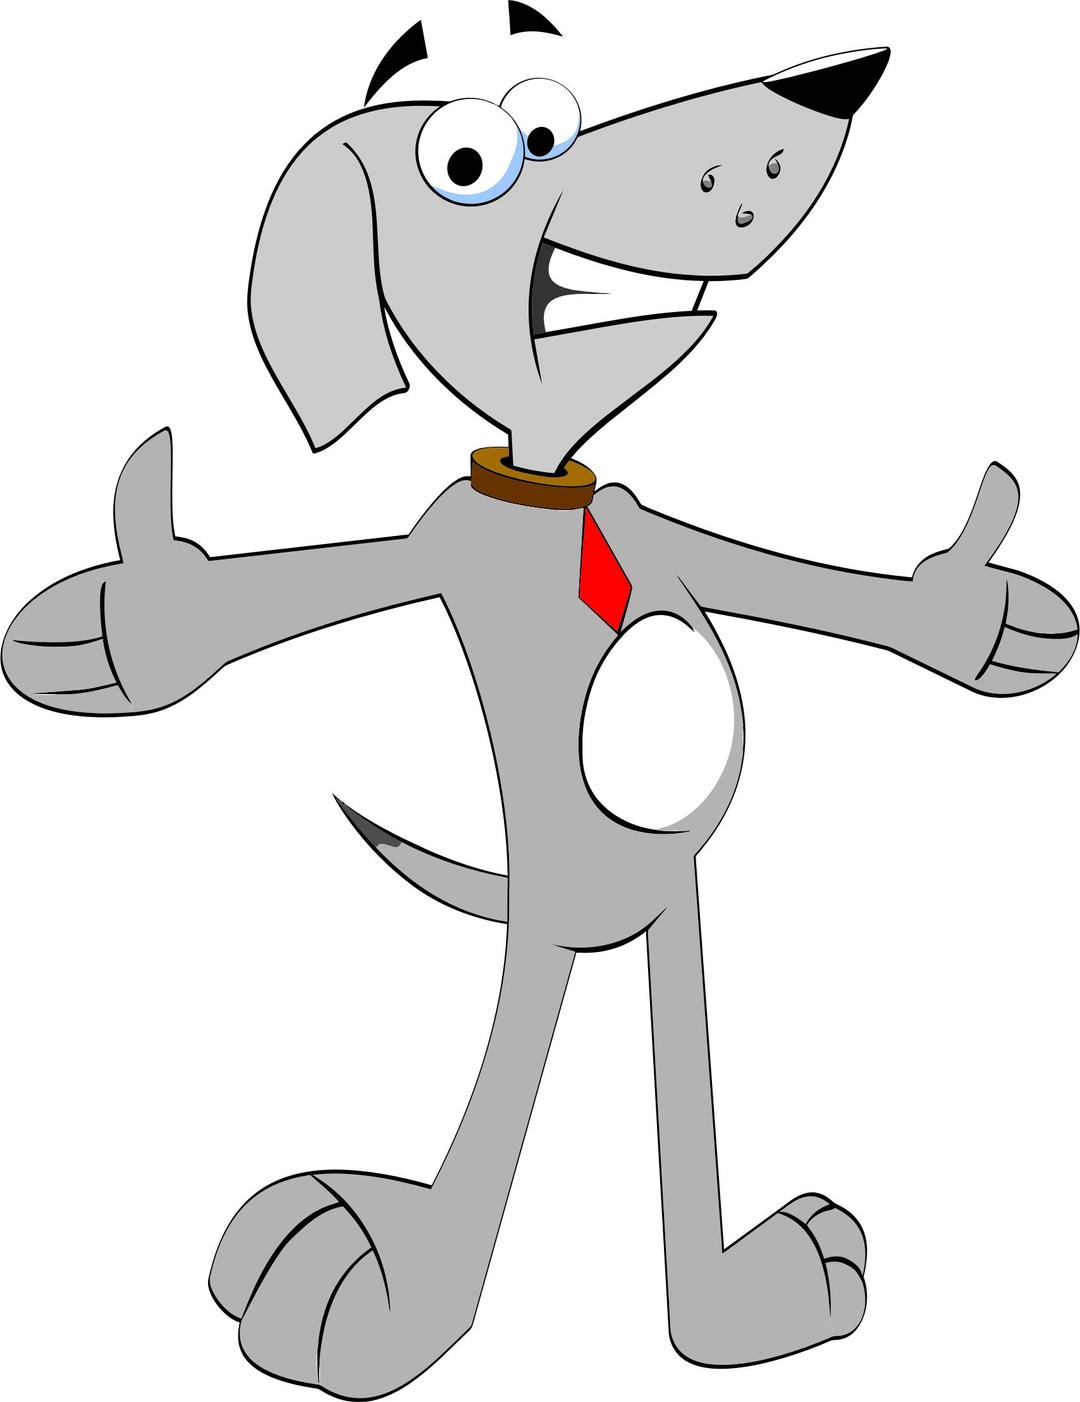 Cartoon Dog With Outstretched Arms png transparent